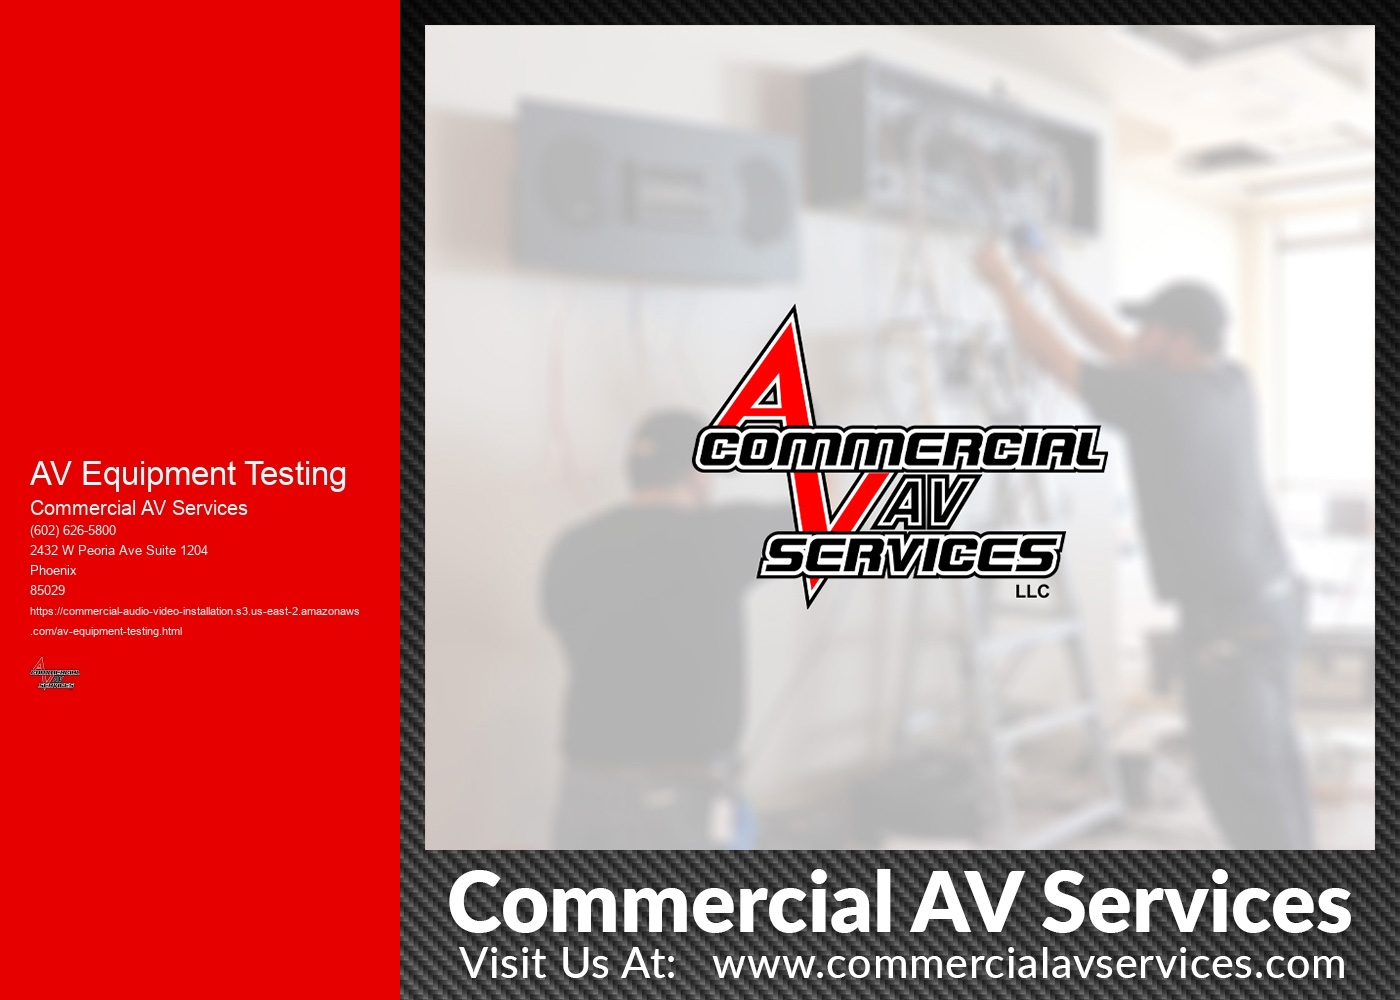 What are the indicators to look for when testing the overall performance and reliability of my AV equipment?